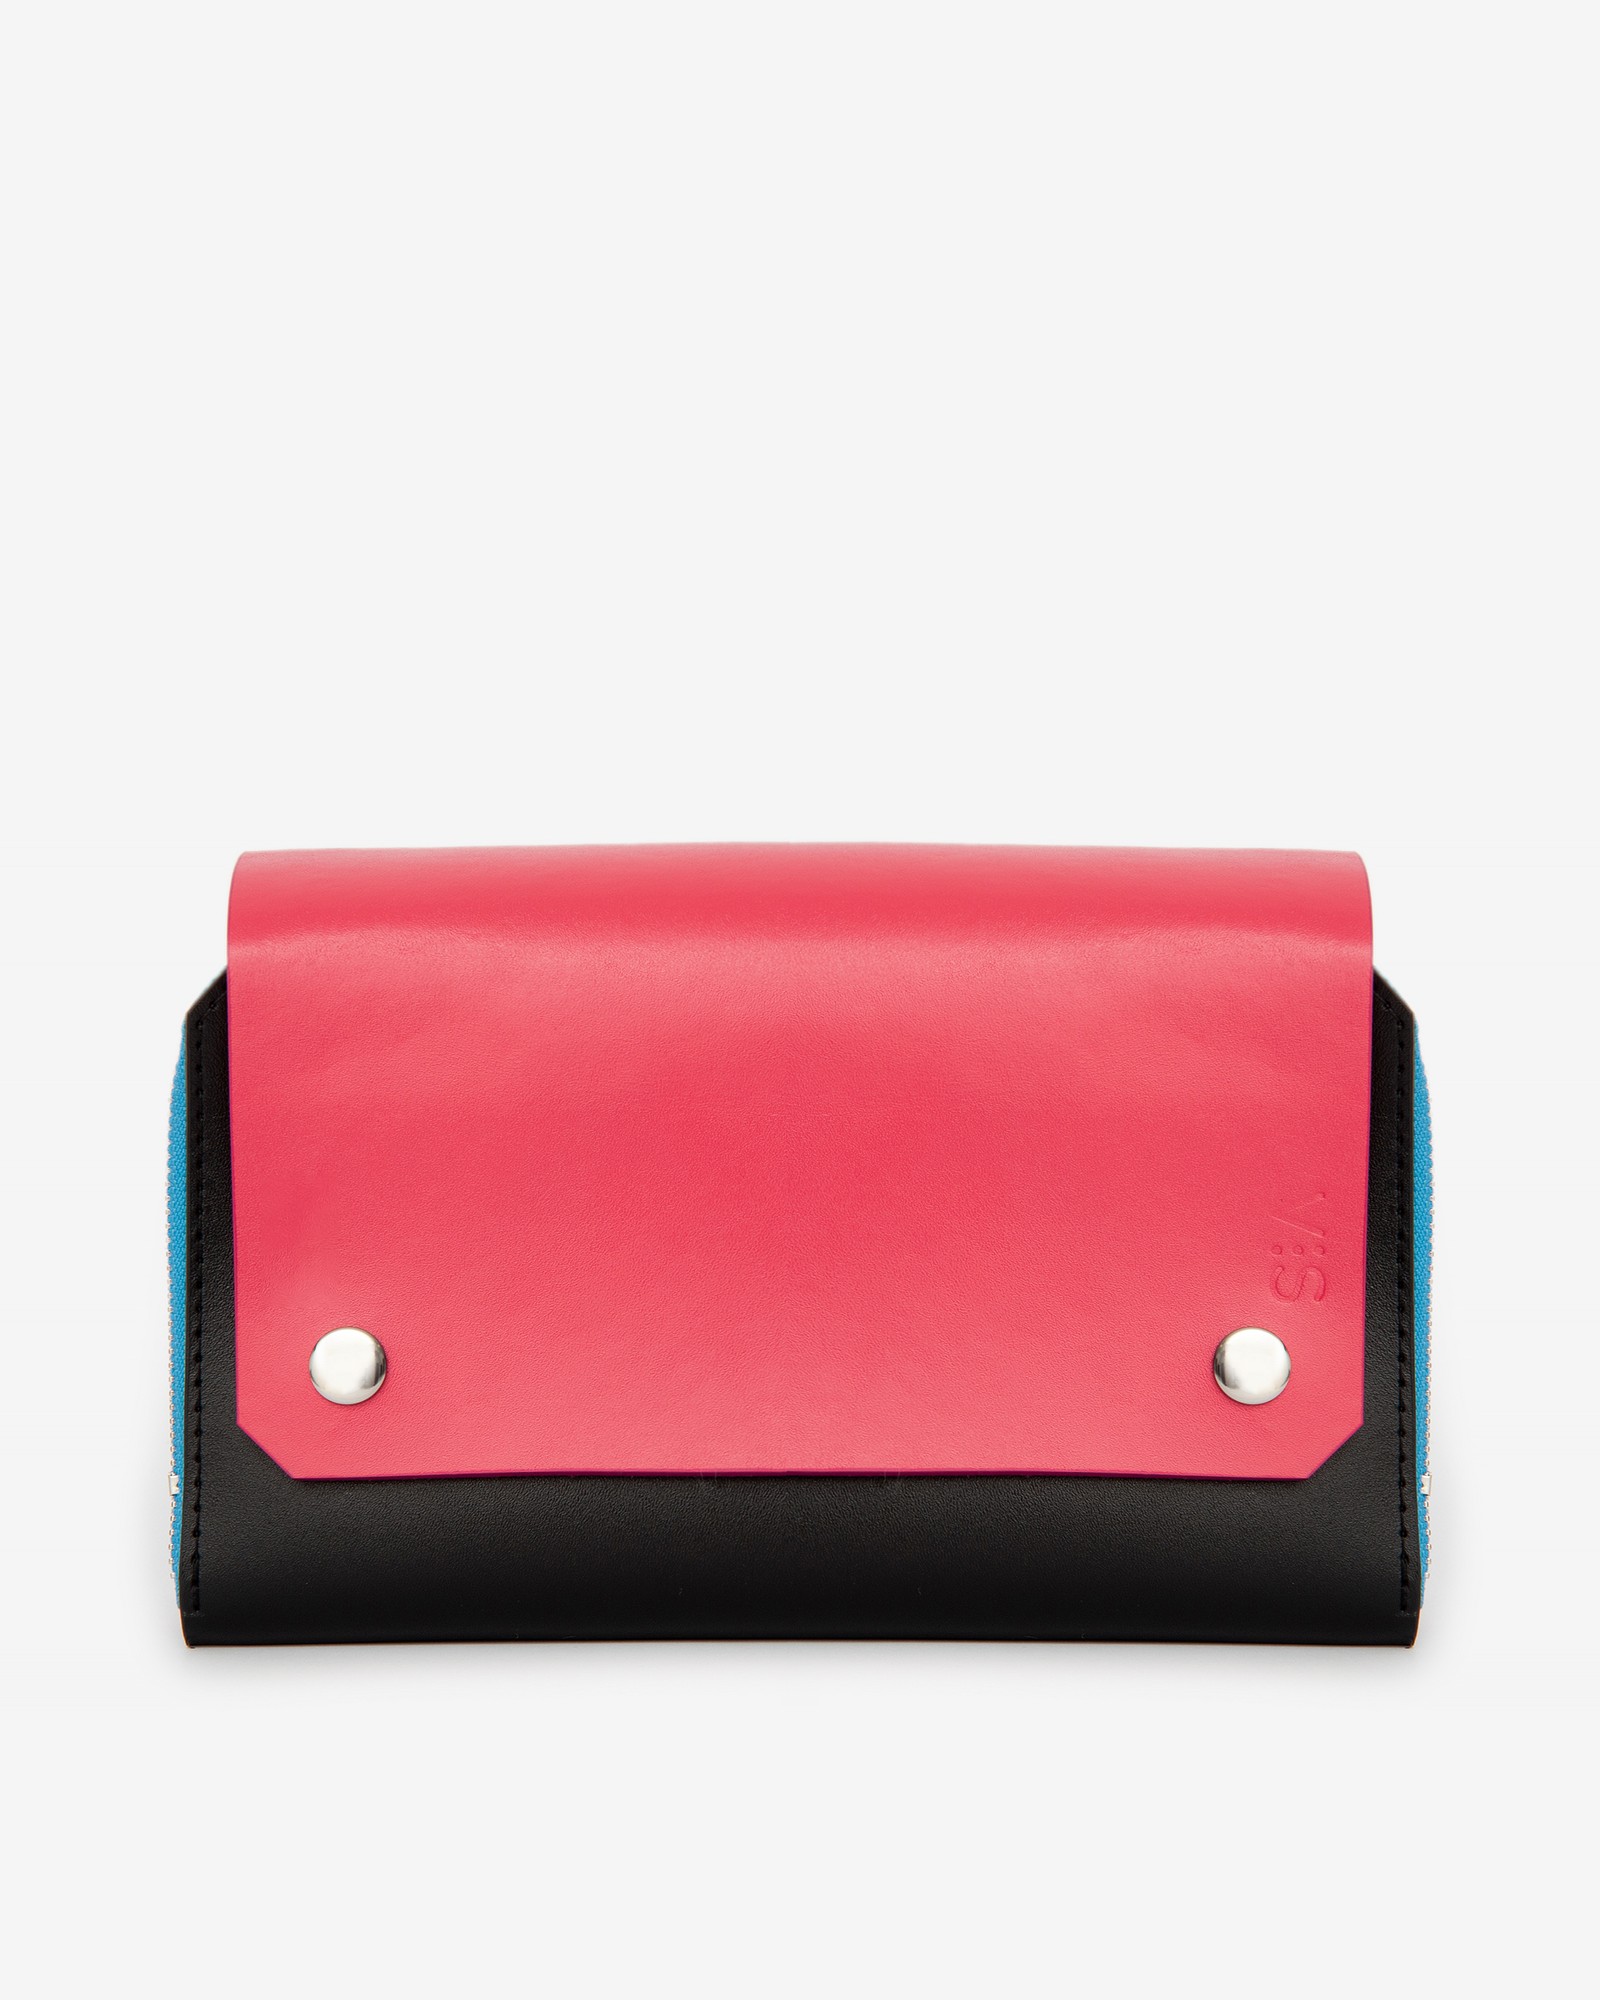 Navi leather bag in pink and black color